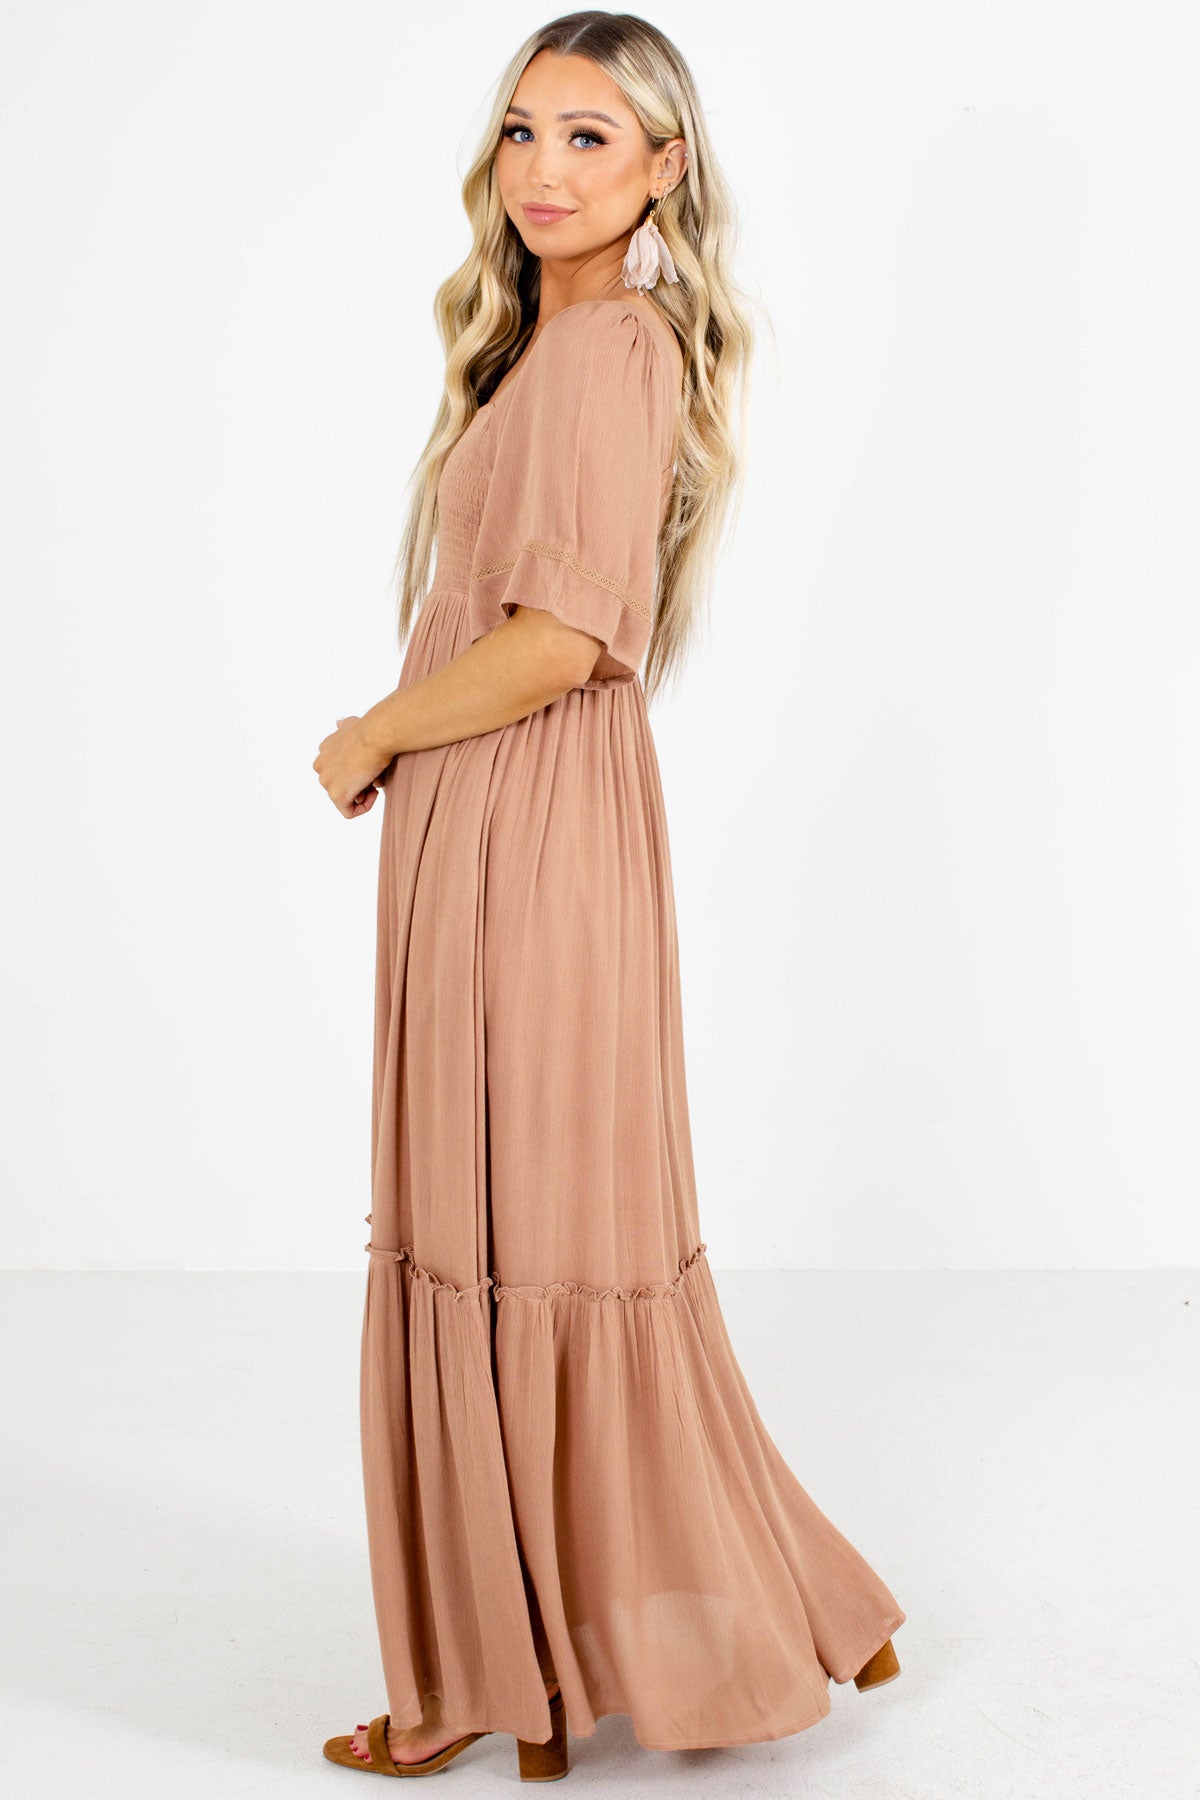 Ruched Flowy Dress For Women